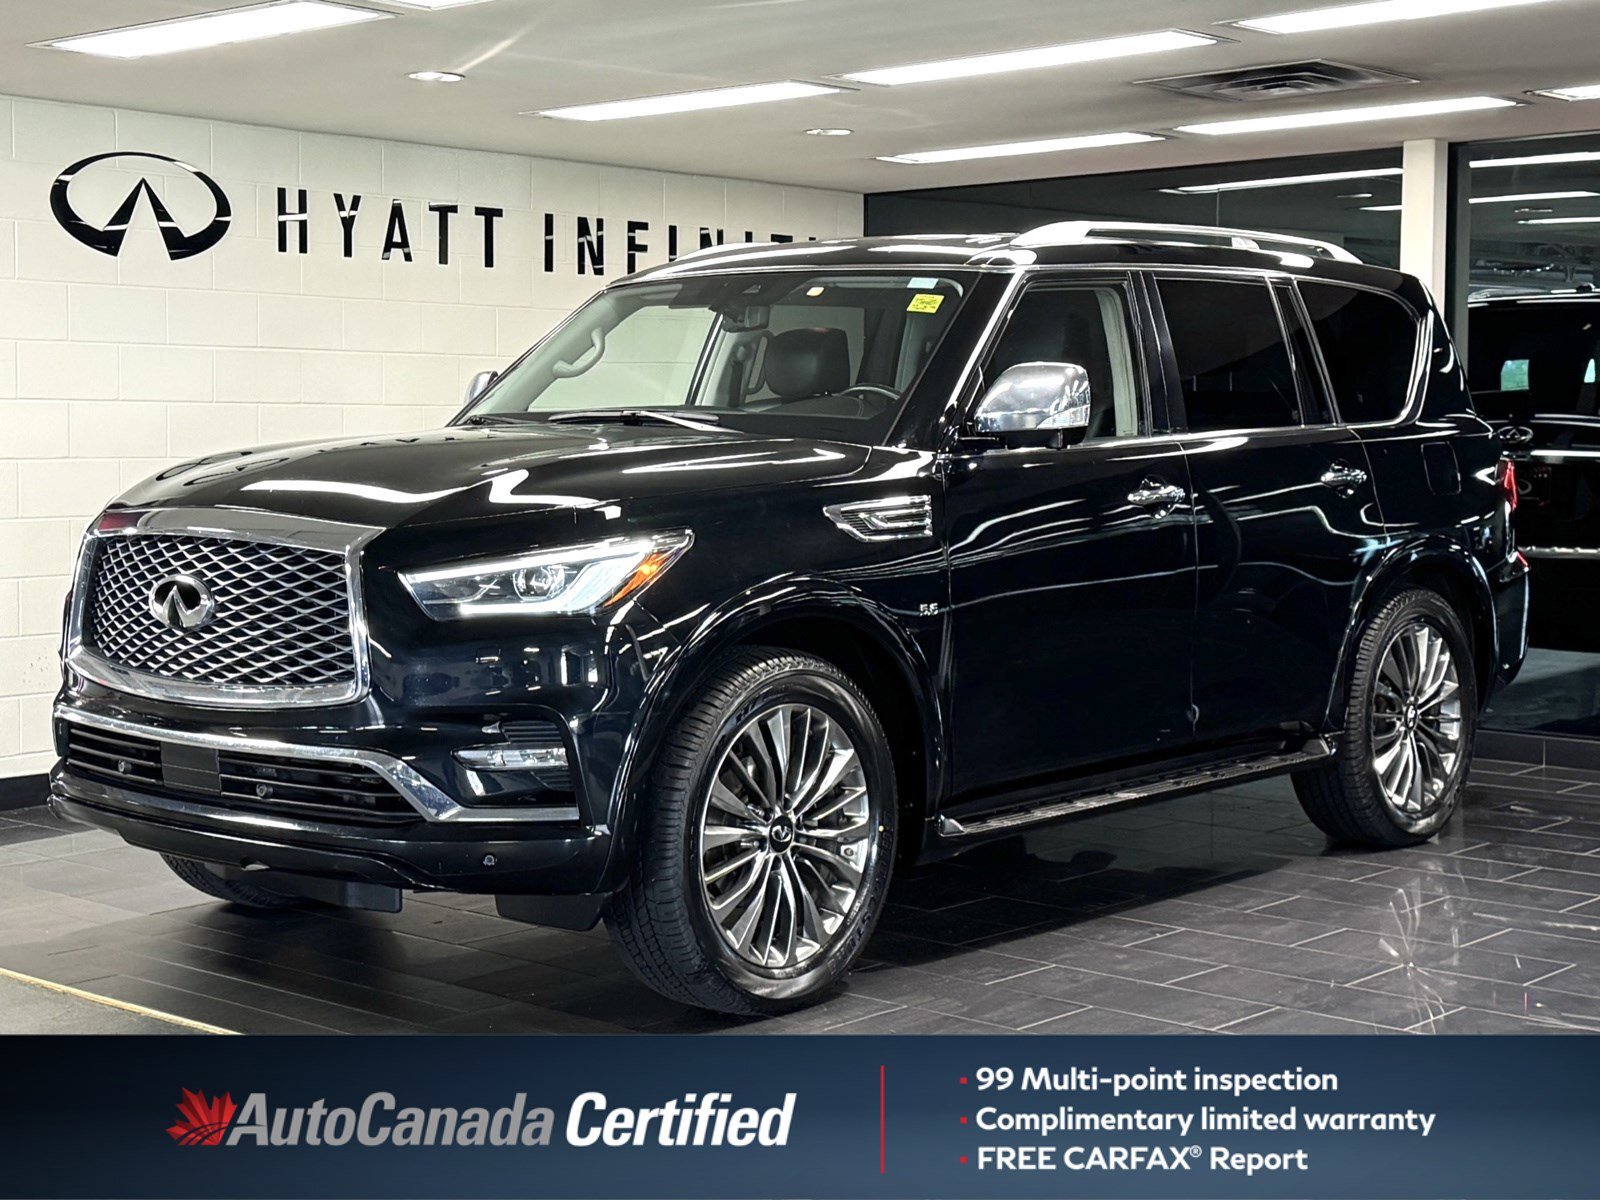 2019 Infiniti QX80 7 Passenger ProACTIVE - One Owner | No Accidents |